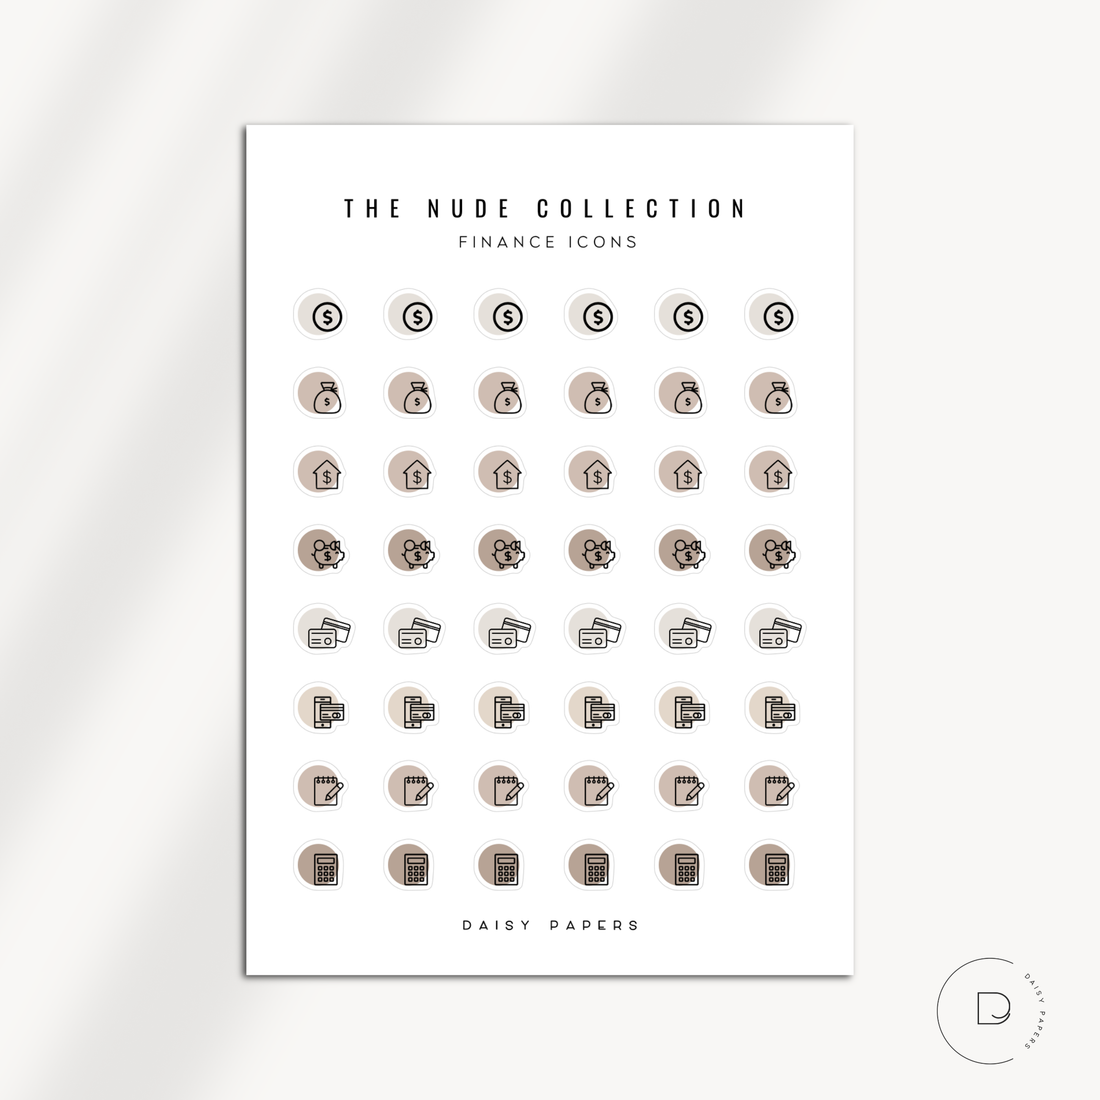 THE NUDE COLLECTION - Finance Icons